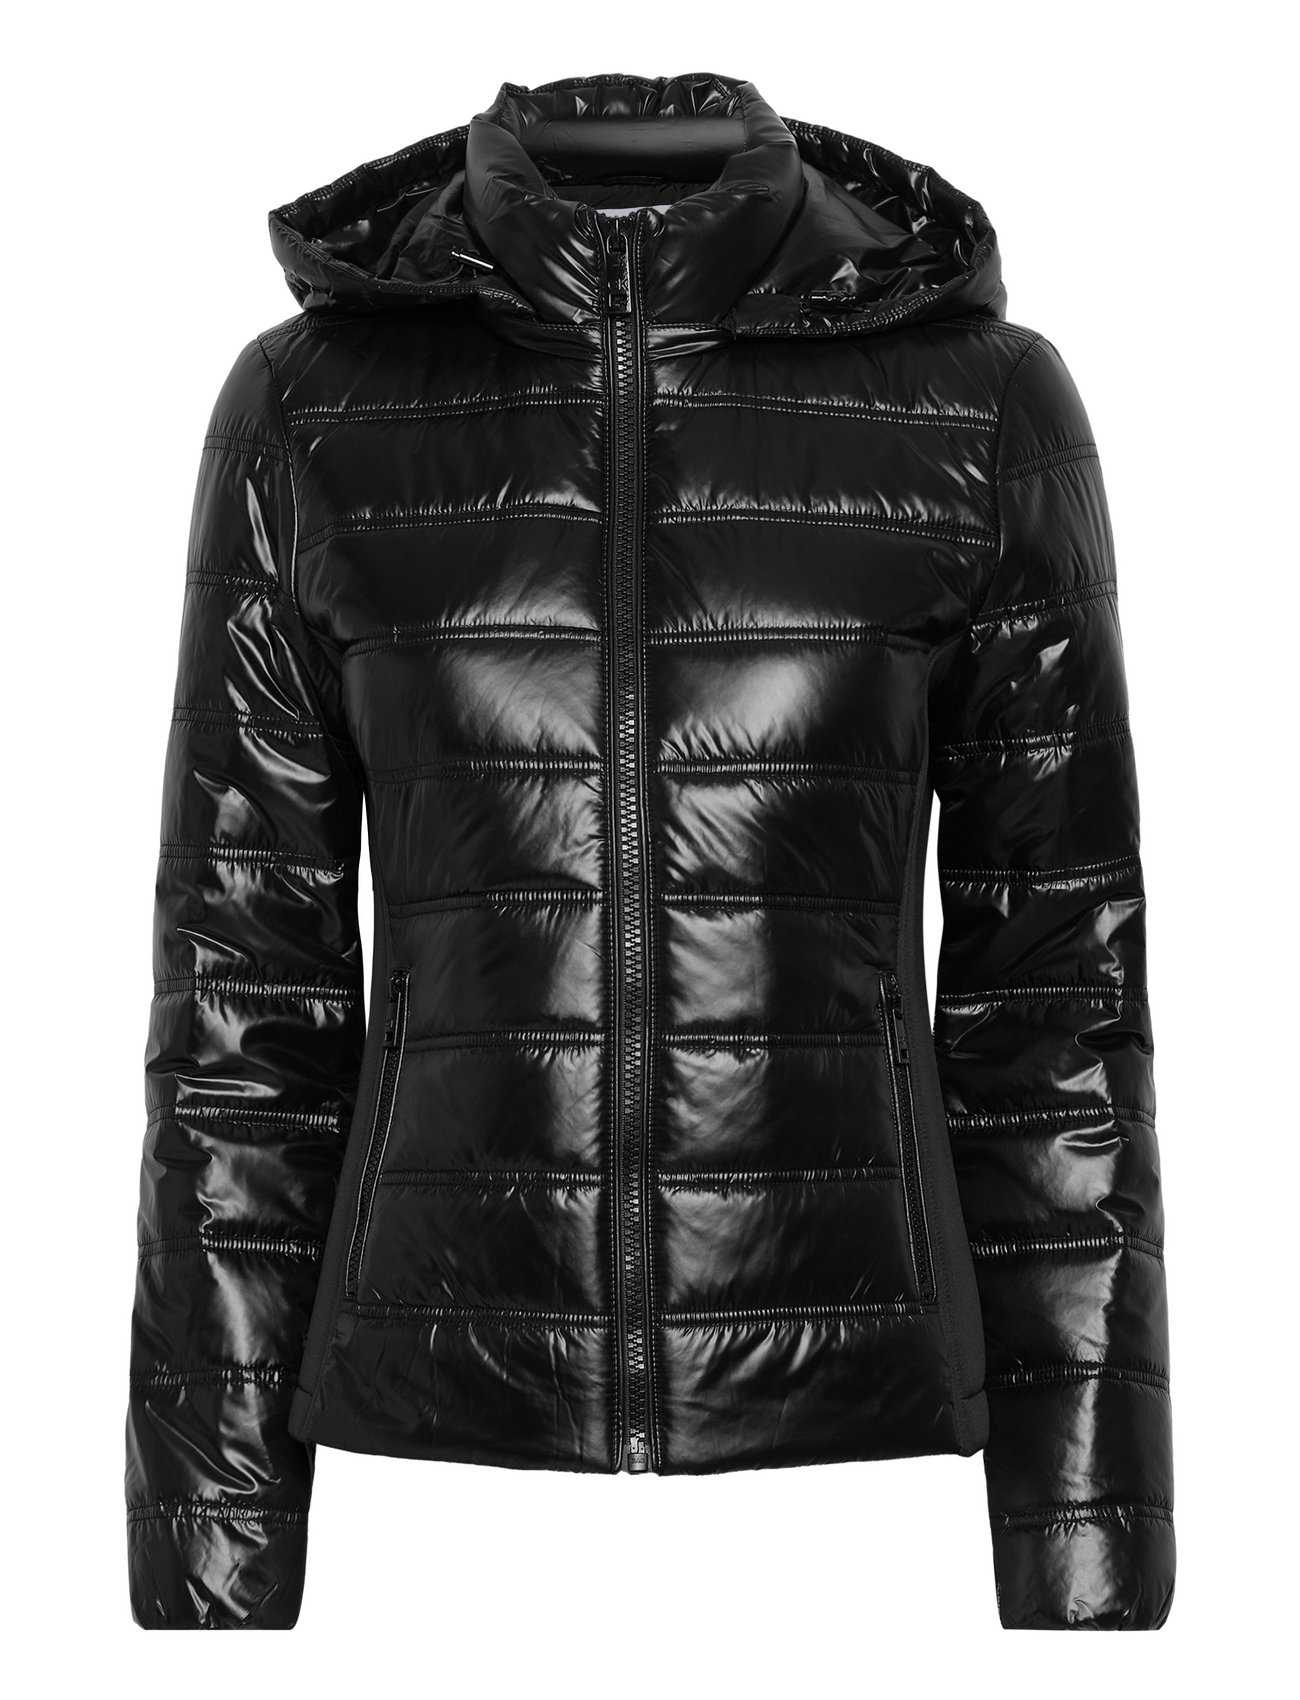 Calvin Klein Lw Padded Waisted Nylon Jacket - 114.95 €. Buy Down- & padded  jackets from Calvin Klein online at Boozt.com. Fast delivery and easy  returns